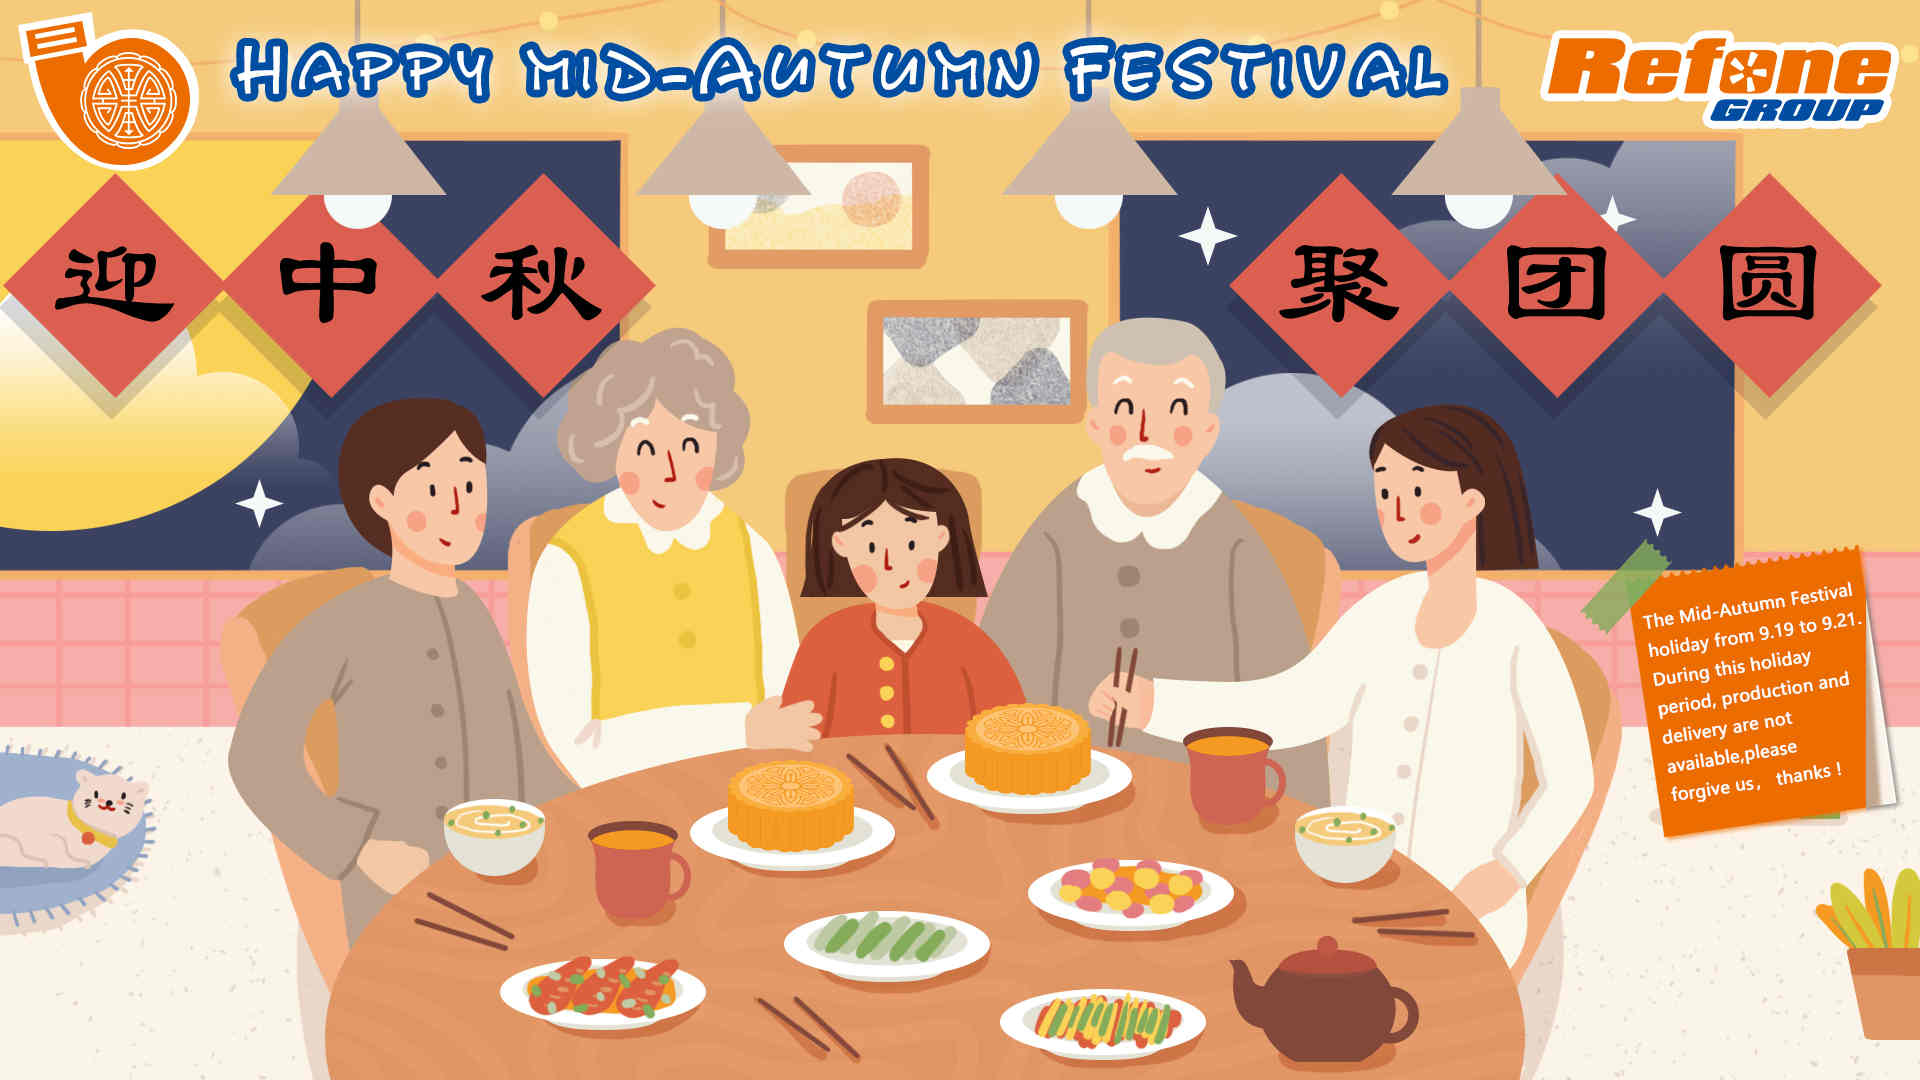 Chinese Mid-Autumn Festival is coming | Refoneturbo.com